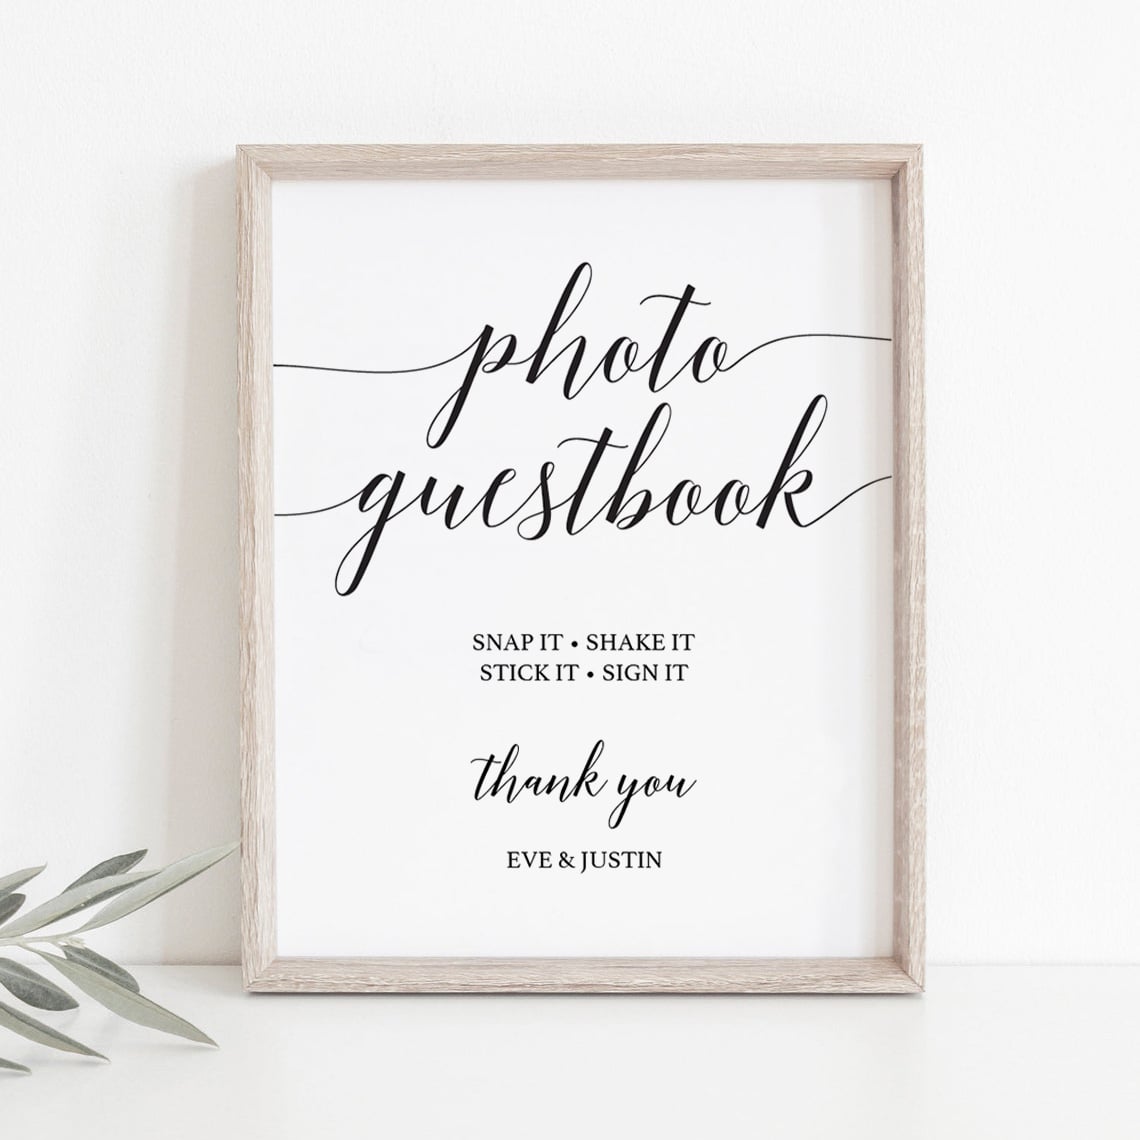 Snap it shake it wedding guestbook sign by LittleSizzle